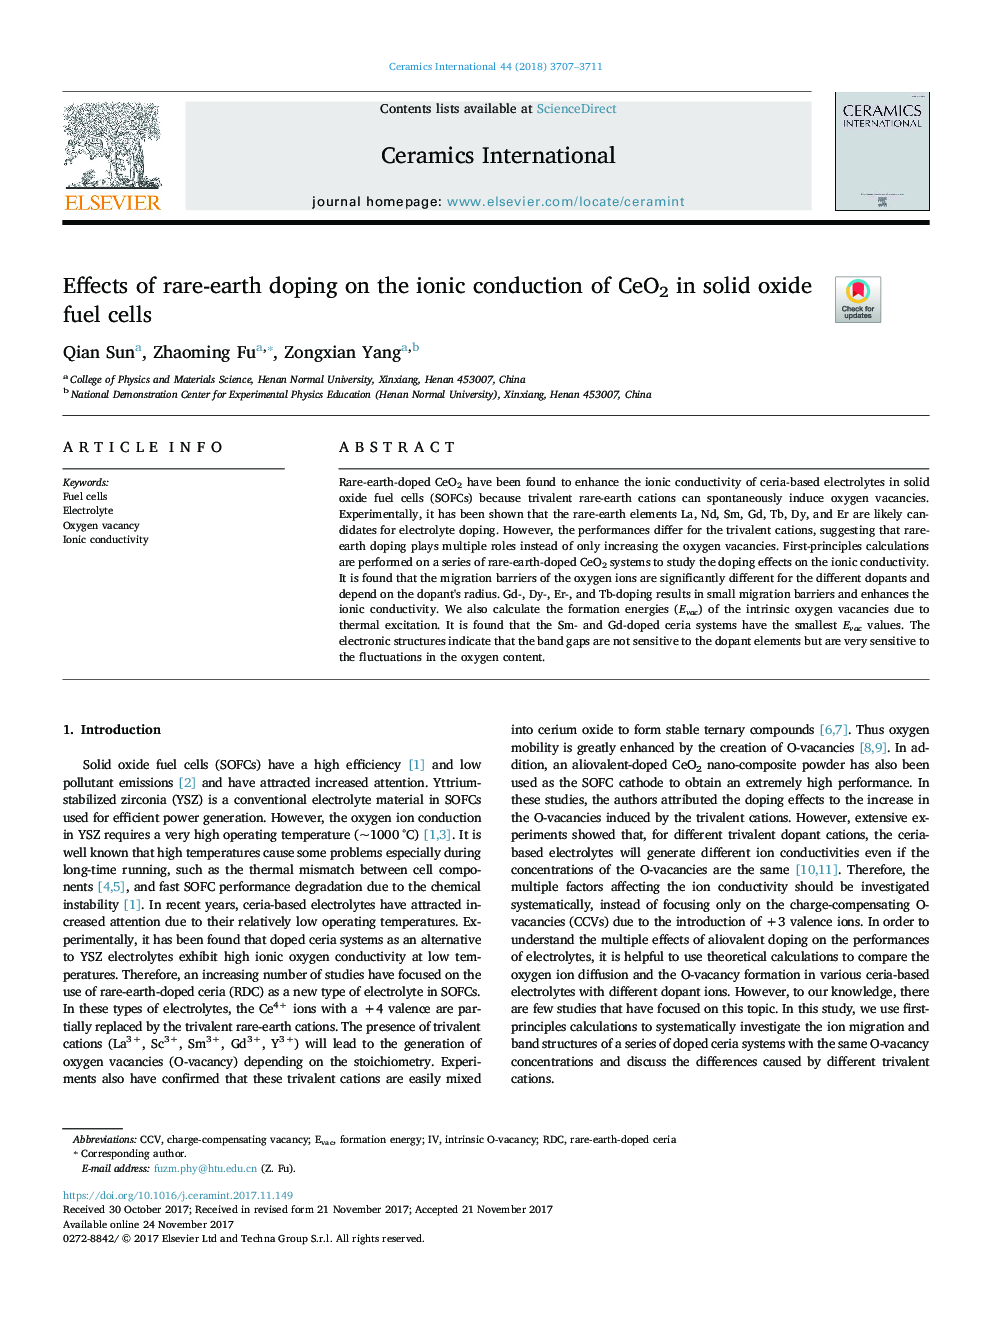 Effects of rare-earth doping on the ionic conduction of CeO2 in solid oxide fuel cells